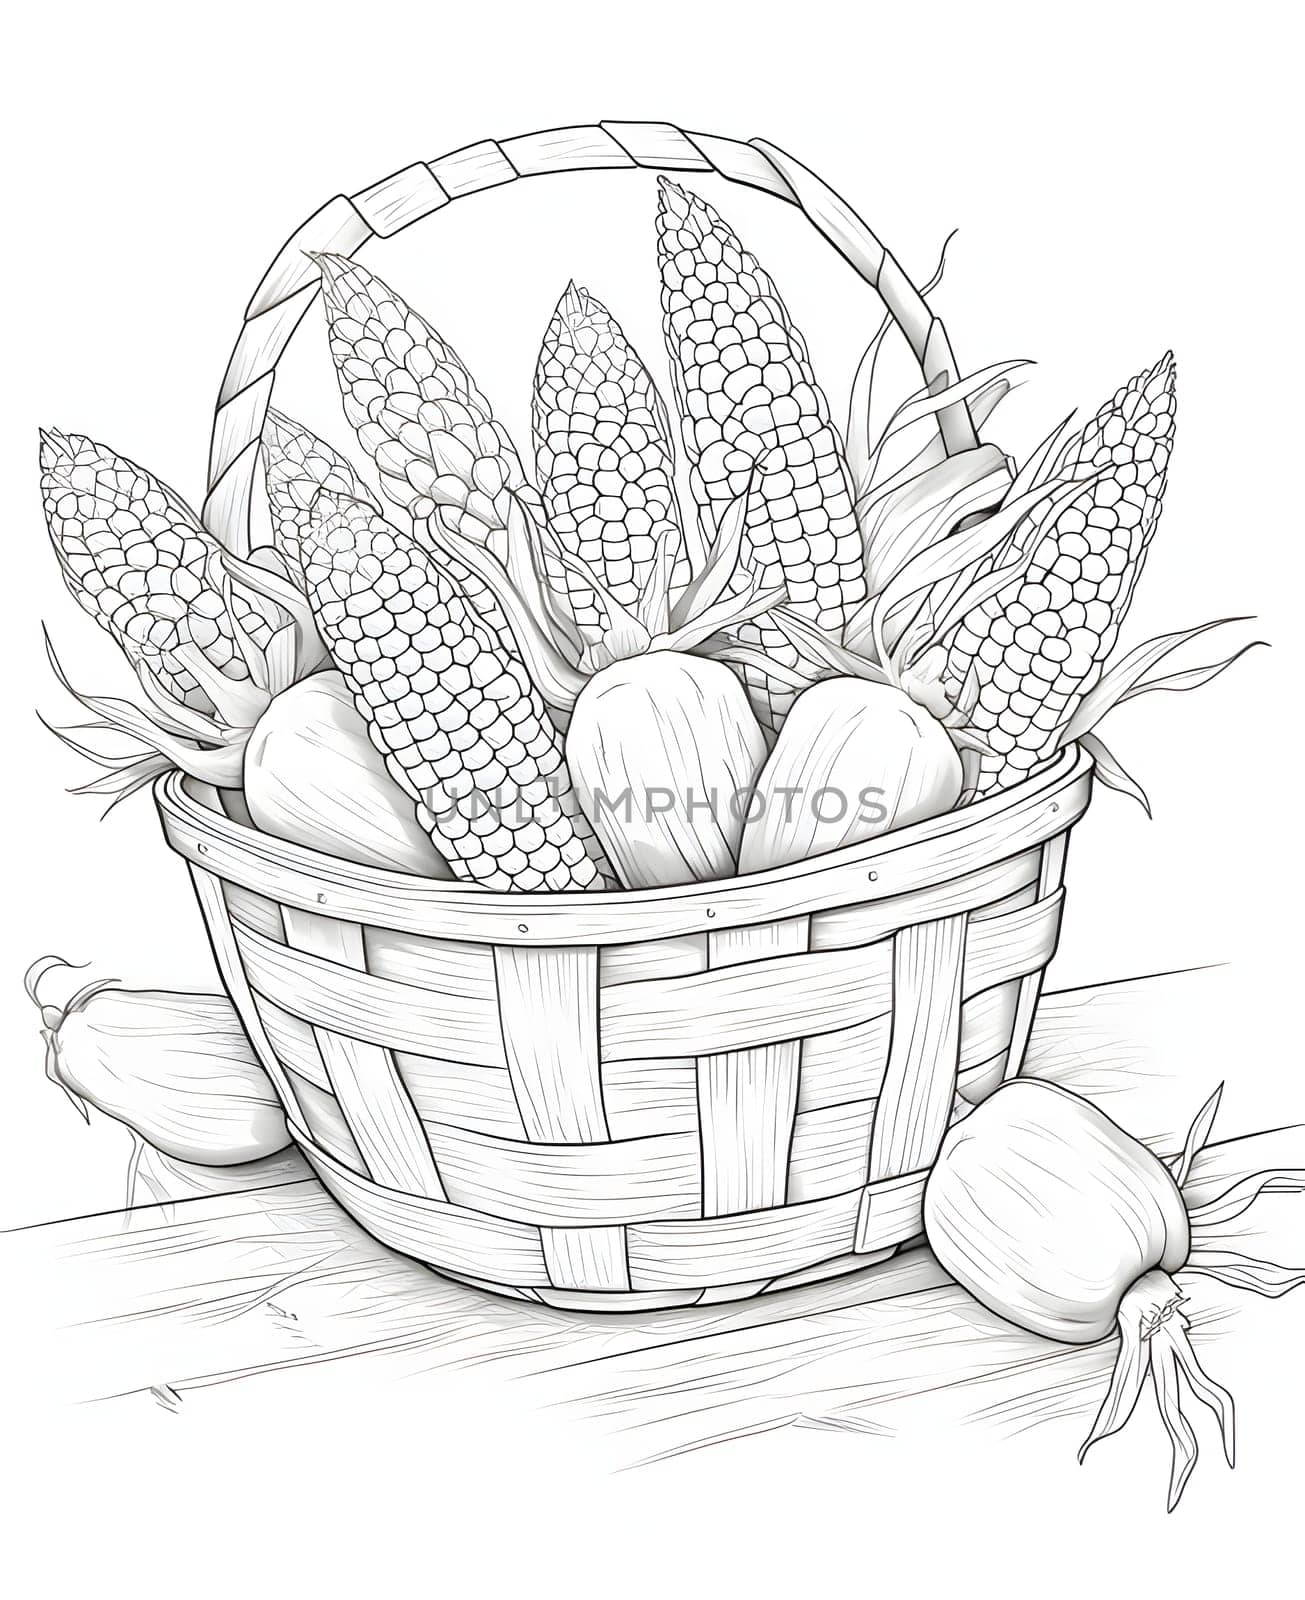 Black and White coloring book wicker basket, full of vegetables, fruits leaves, corn cobs. Corn as a dish of thanksgiving for the harvest, a picture on a white isolated background. An atmosphere of joy and celebration.